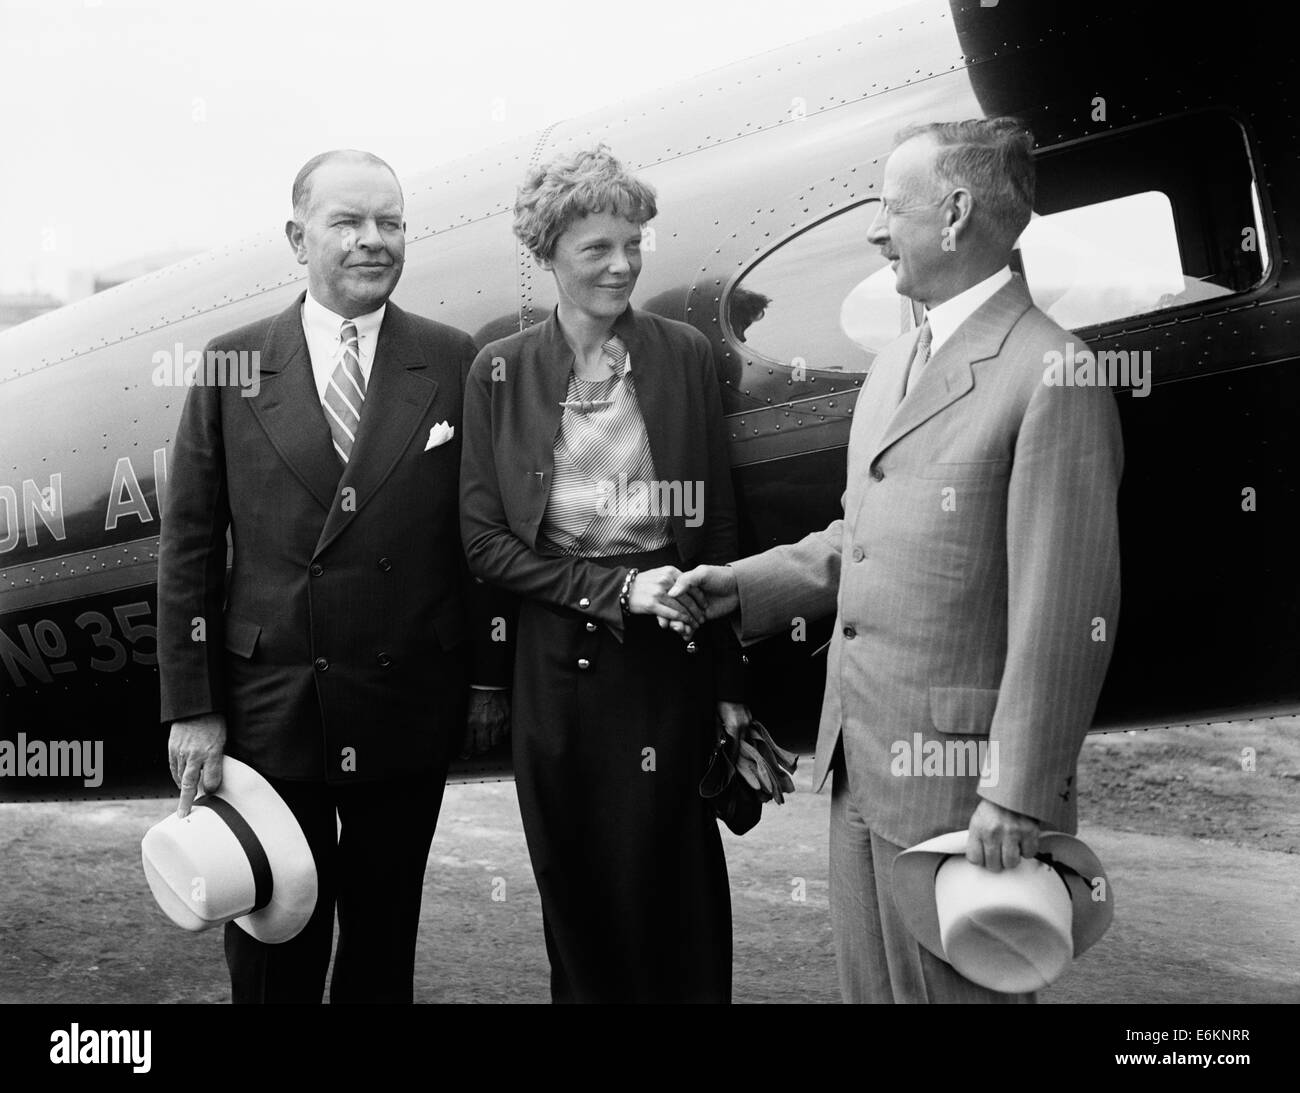 Vintage photo of American aviation pioneer and author Amelia Earhart (1897 – declared dead 1939) – Earhart and her navigator Fred Noonan famously vanished in 1937 while she was trying to become the first female to complete a circumnavigational flight of the globe. Earhart is pictured in 1932 shaking hands with Gilbert Grosvenor, Editor of National Geographic magazine and President of the National Geographic Society. To the left of Earhart is writer and explorer John Oliver La Gorce. Stock Photo